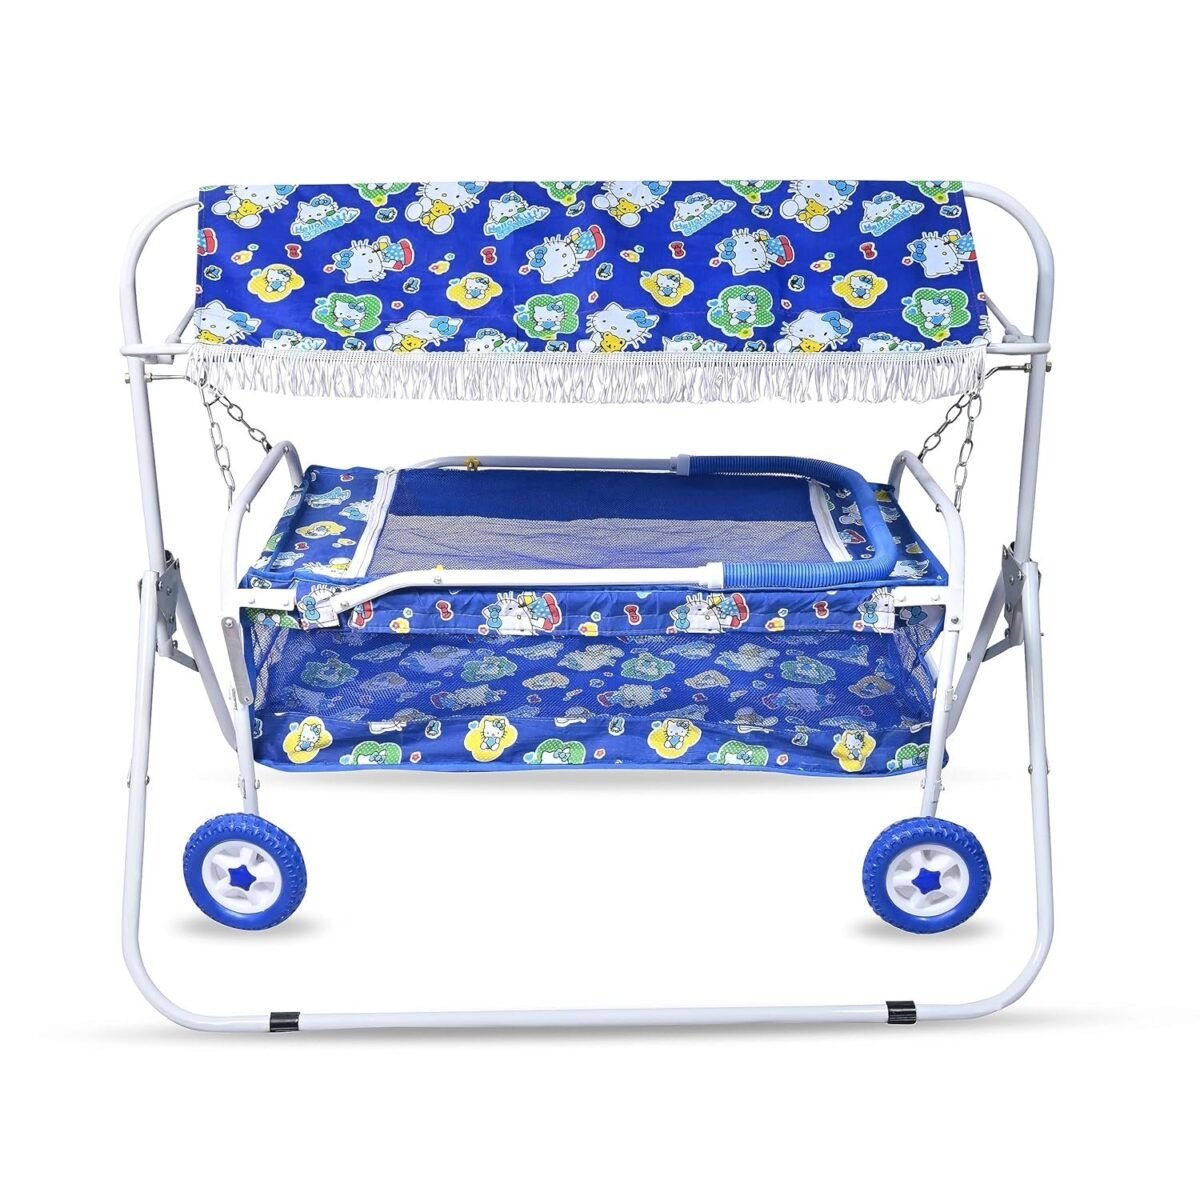 METROBUZZ Baby Folding Cradle Swings Jhula Palna Comfortable Sleep with Mosquito Net for 0-13 Months Infant & Toddlers